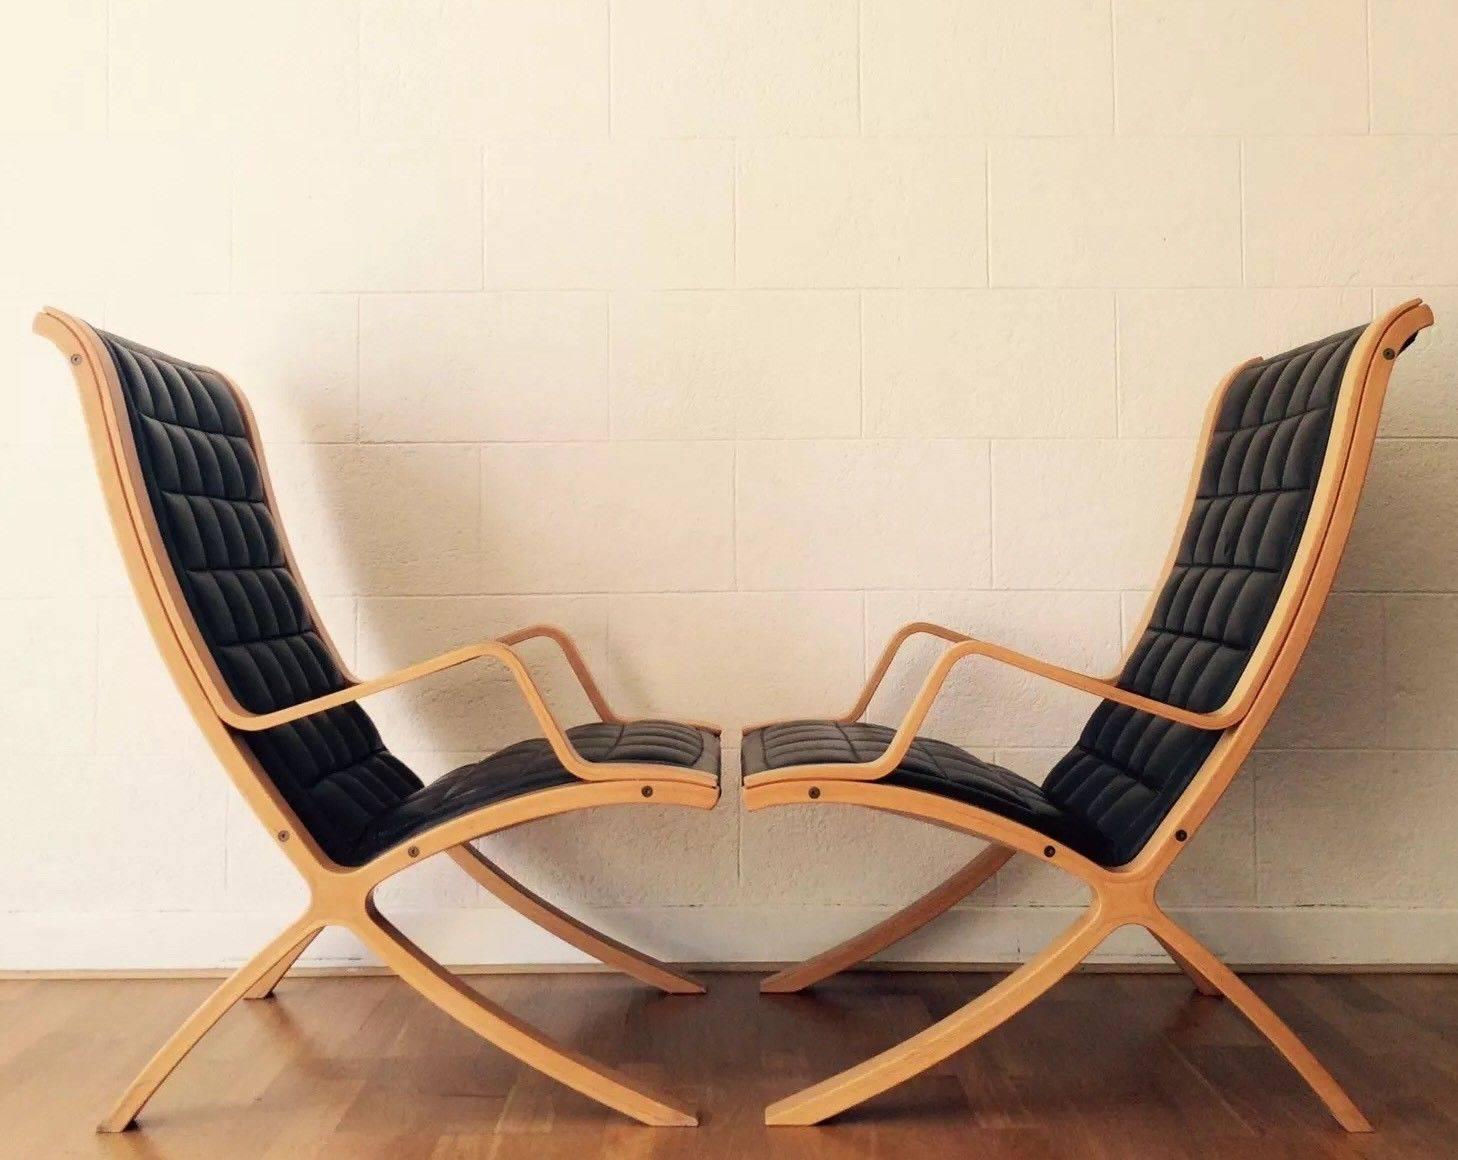 Pair of Ax chairs designed by Orla Mølgaard-Nielsen and Peter Hvidt in 1960, edited by Fritz Hansen Model of the 1980s, sticker present.

Very good condition, leather patina, use stripes.

Scandinavian design, made in Denmark. No restoration.